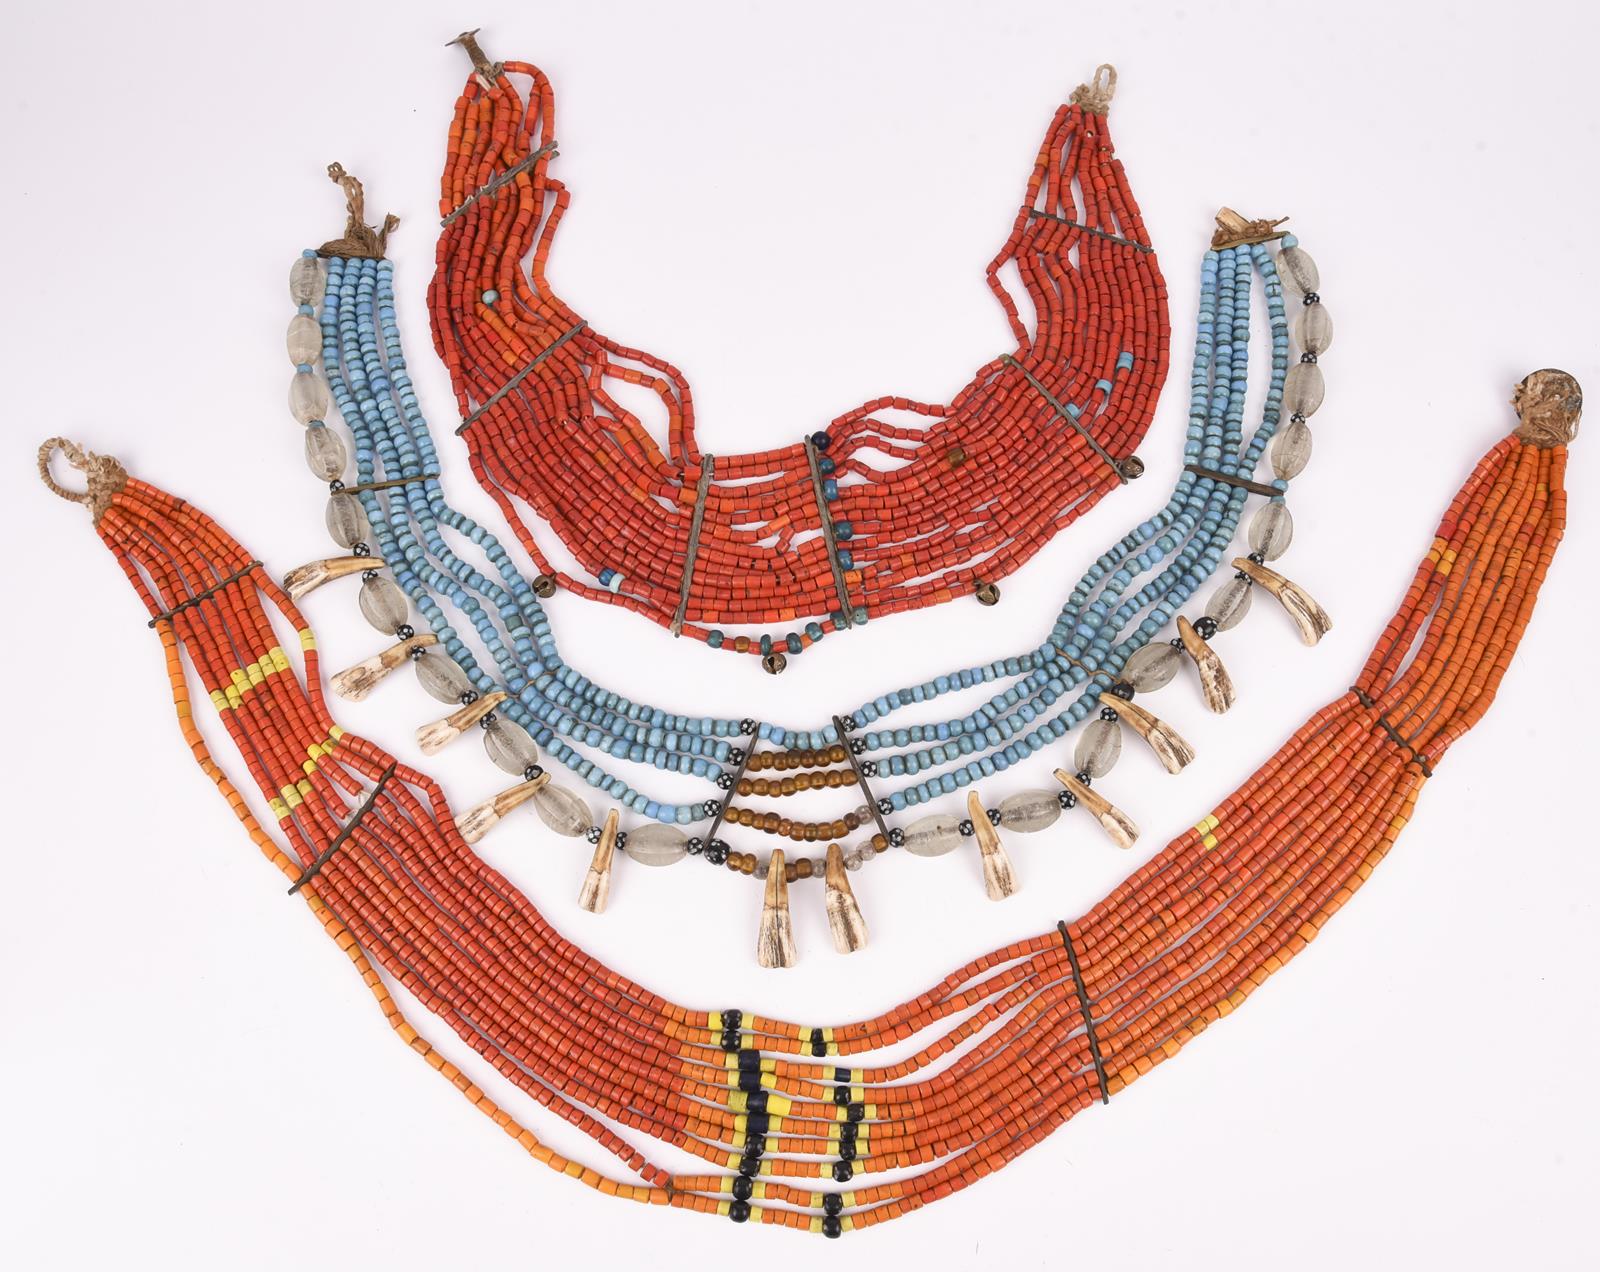 Three Naga necklaces Nagaland coloured and clear glass beads, brass and bone spacers, pig teeth - Image 2 of 6